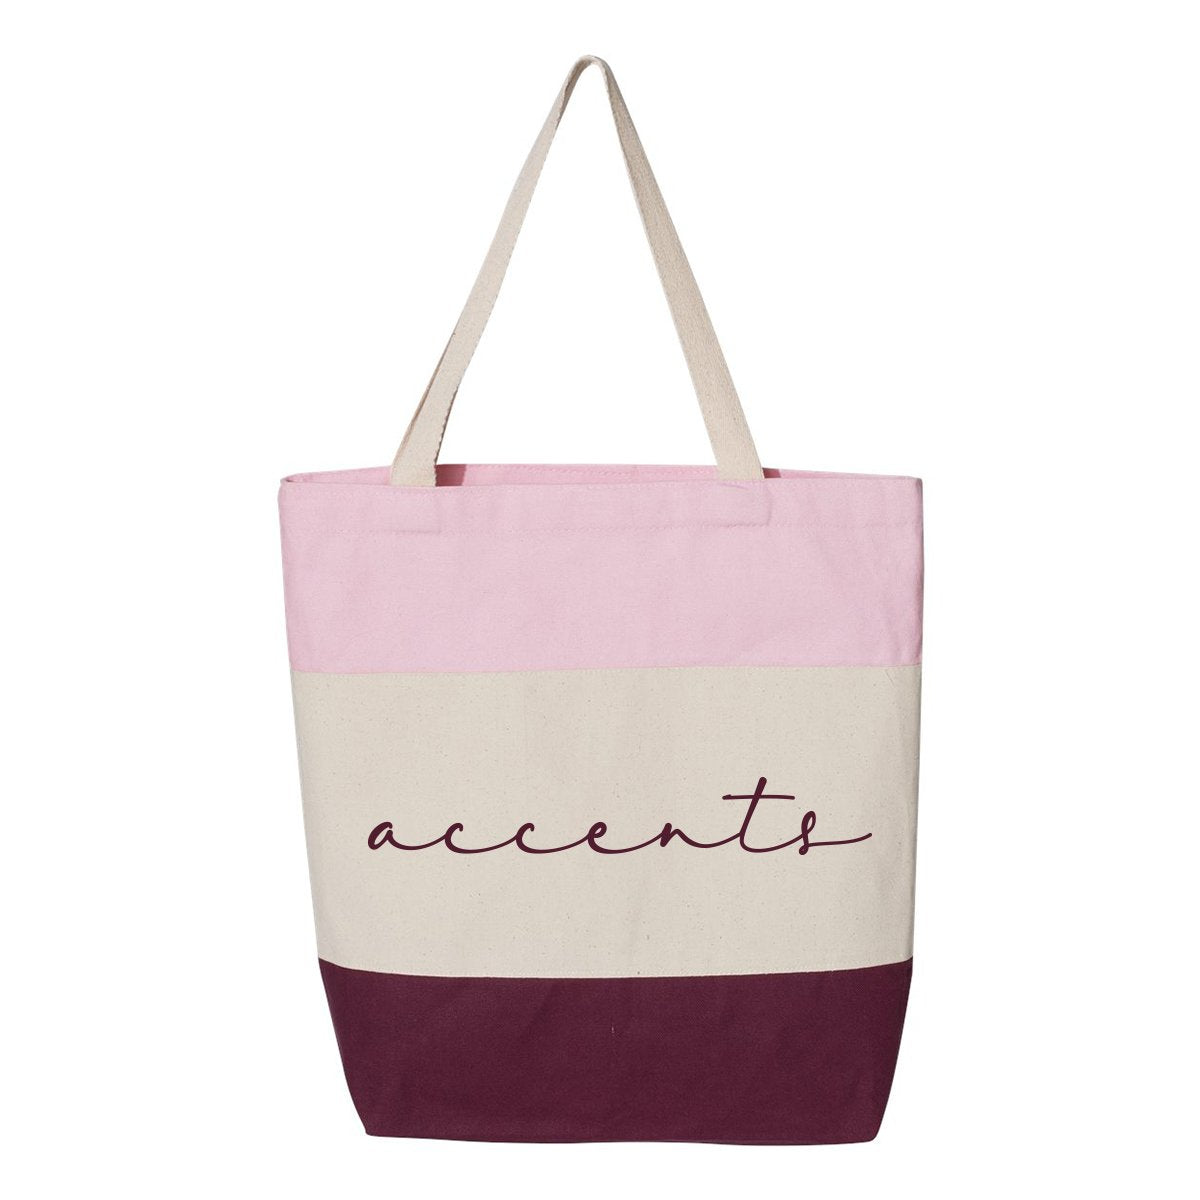 Accents Pink Tote